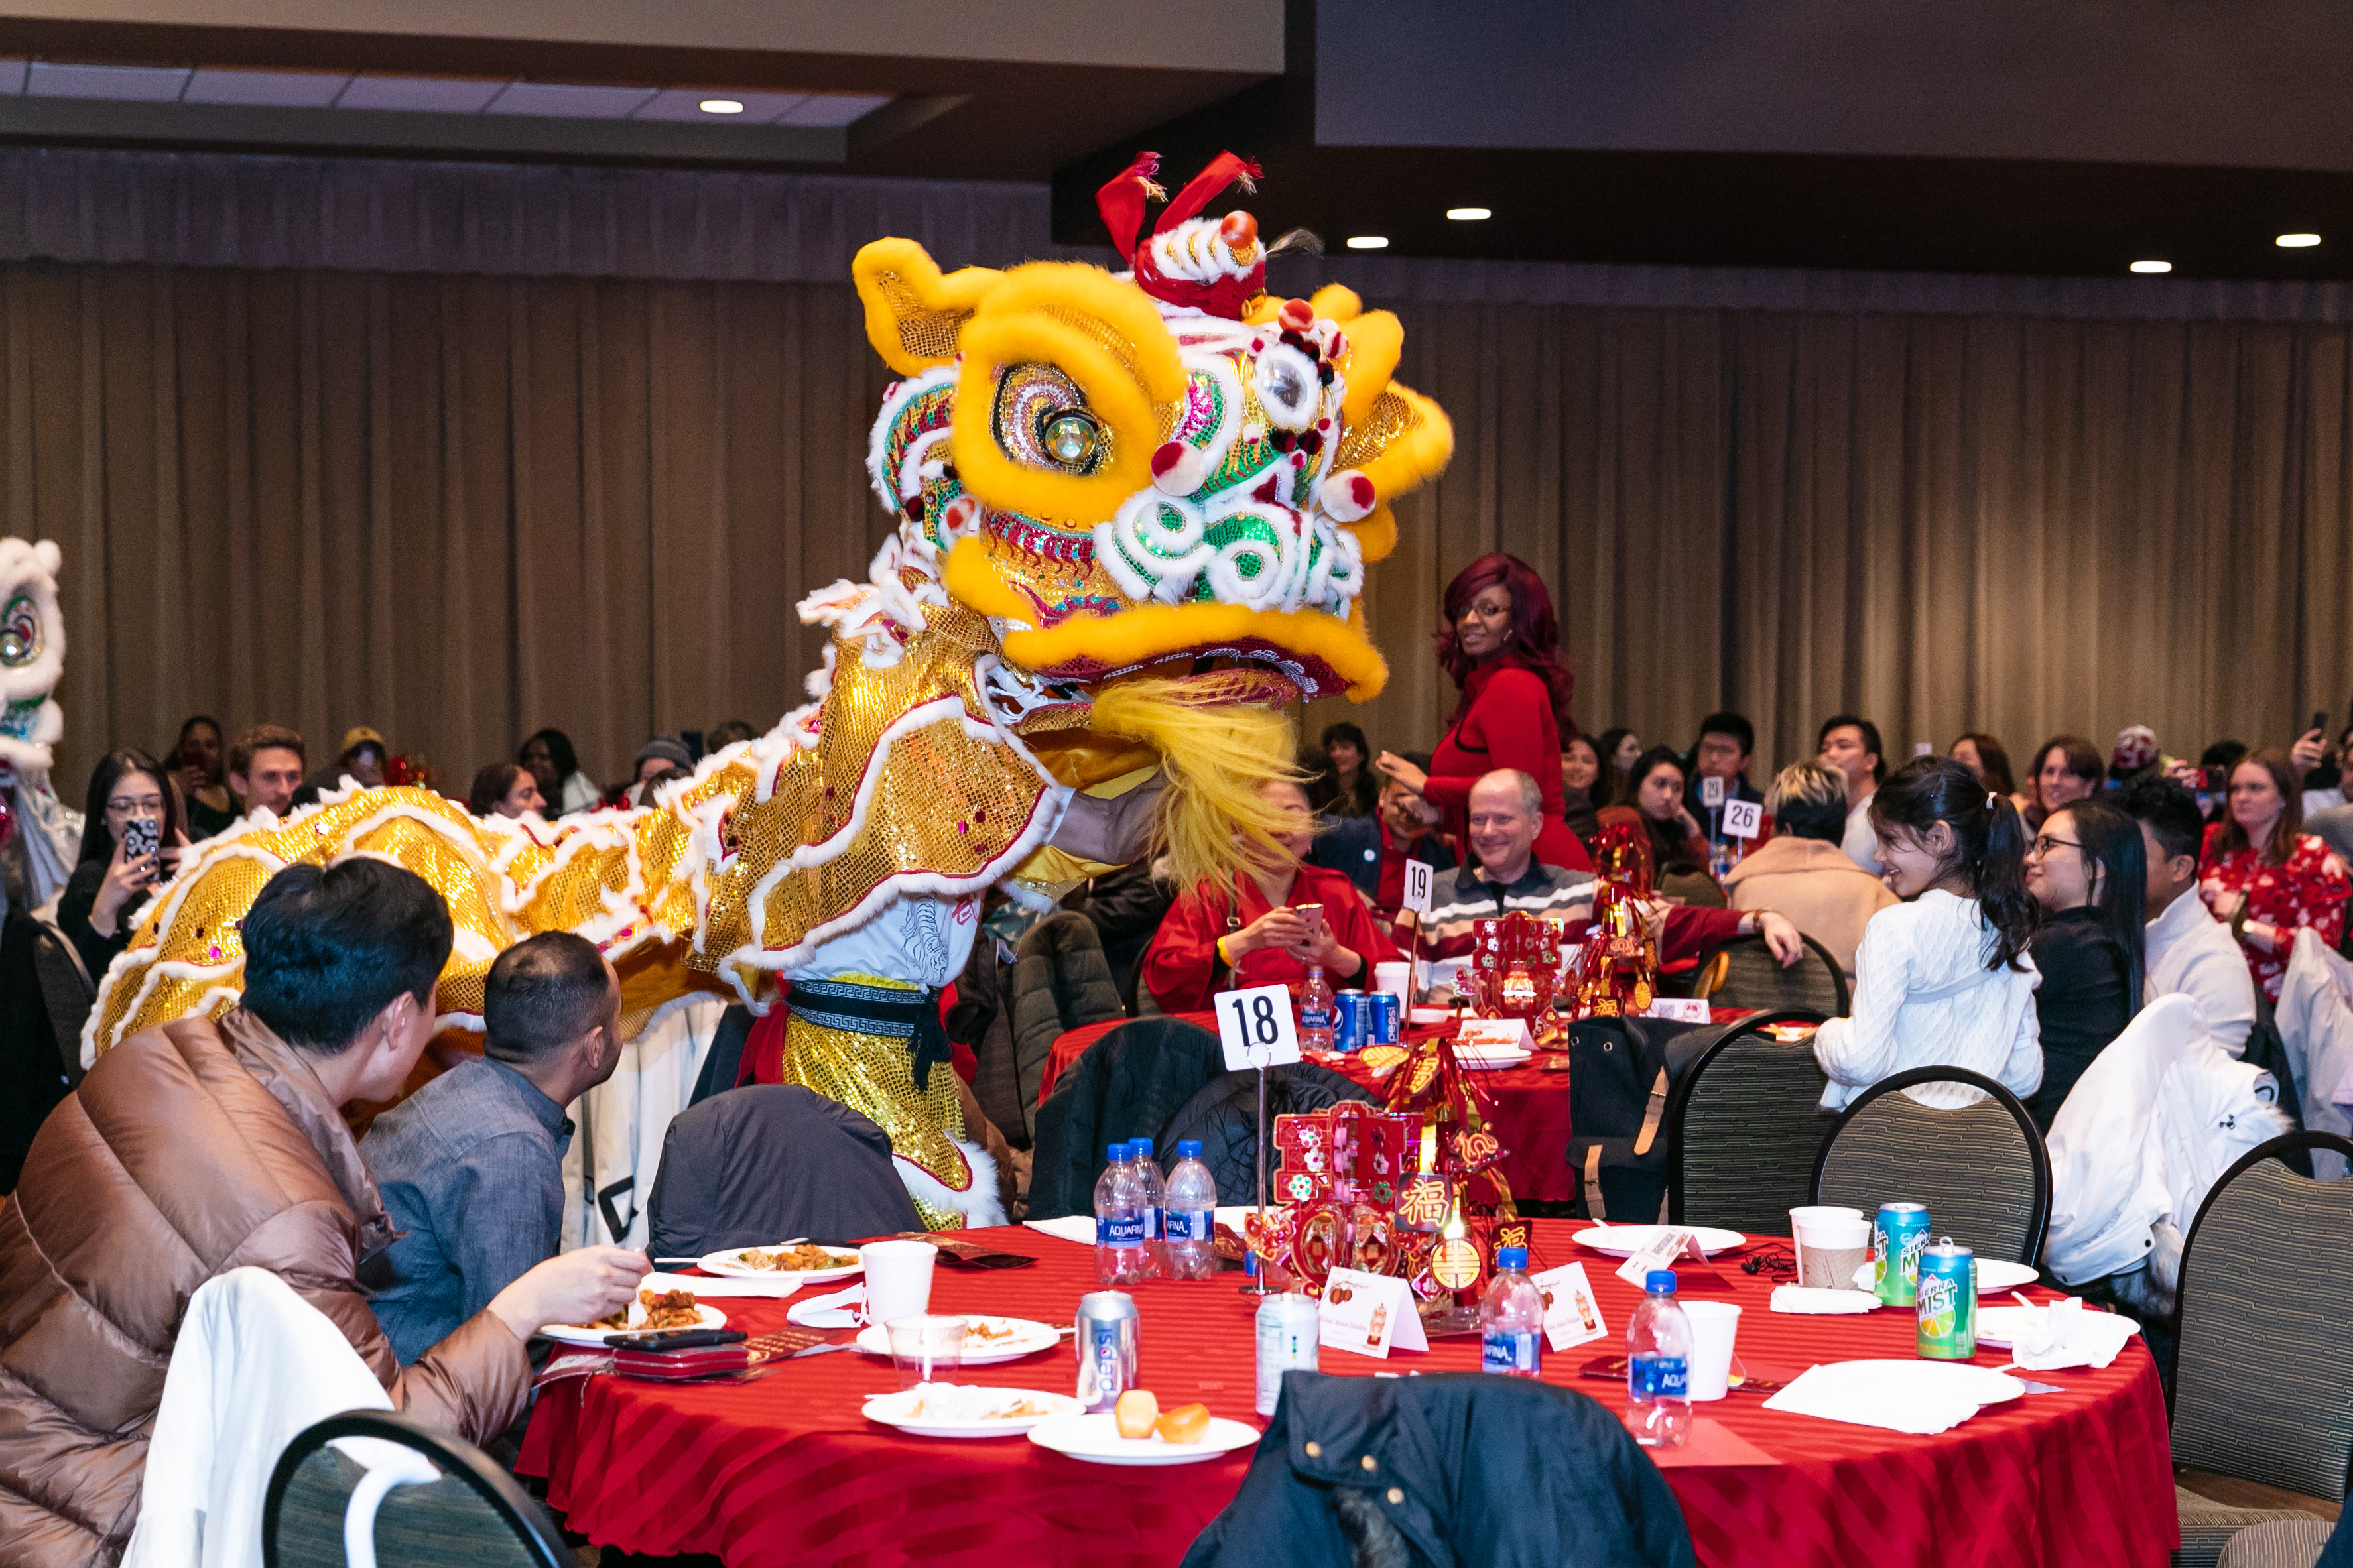 Guests were entertained by a traditional Chinese lion dance during the celebration. (DePaul University/Randall Spriggs)